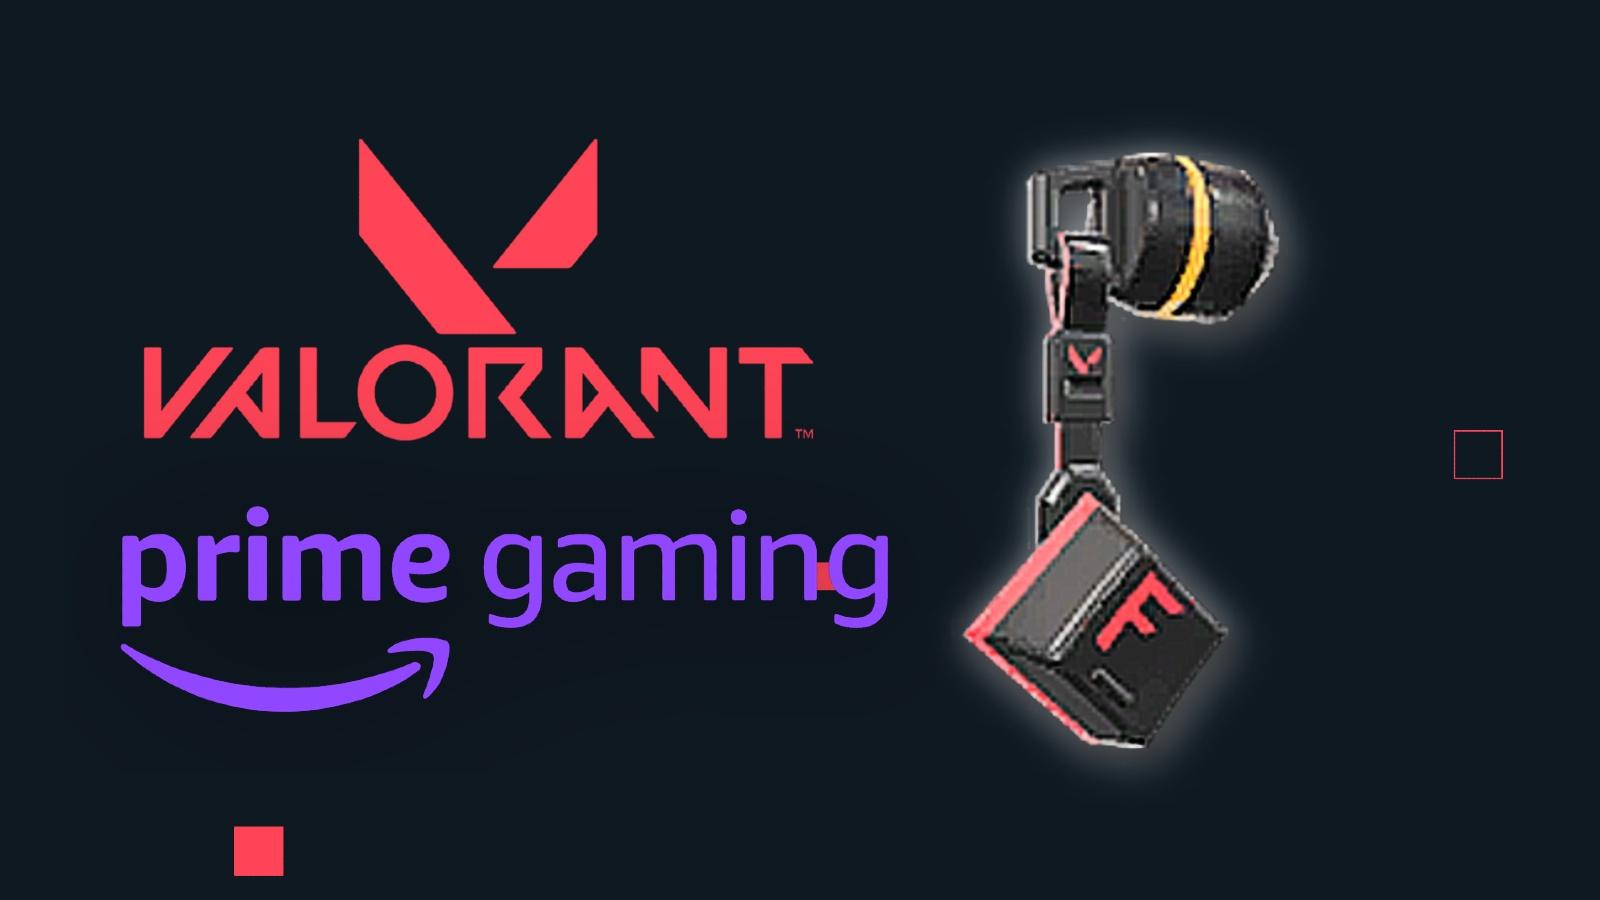 Valorant Tower of Power Gun Buddy, 🖥⌨️ PCs are expensive, but the  exclusive VALORANT Tower of Power Gun Buddy is free with #PrimeGaming! 👑  Get it right here